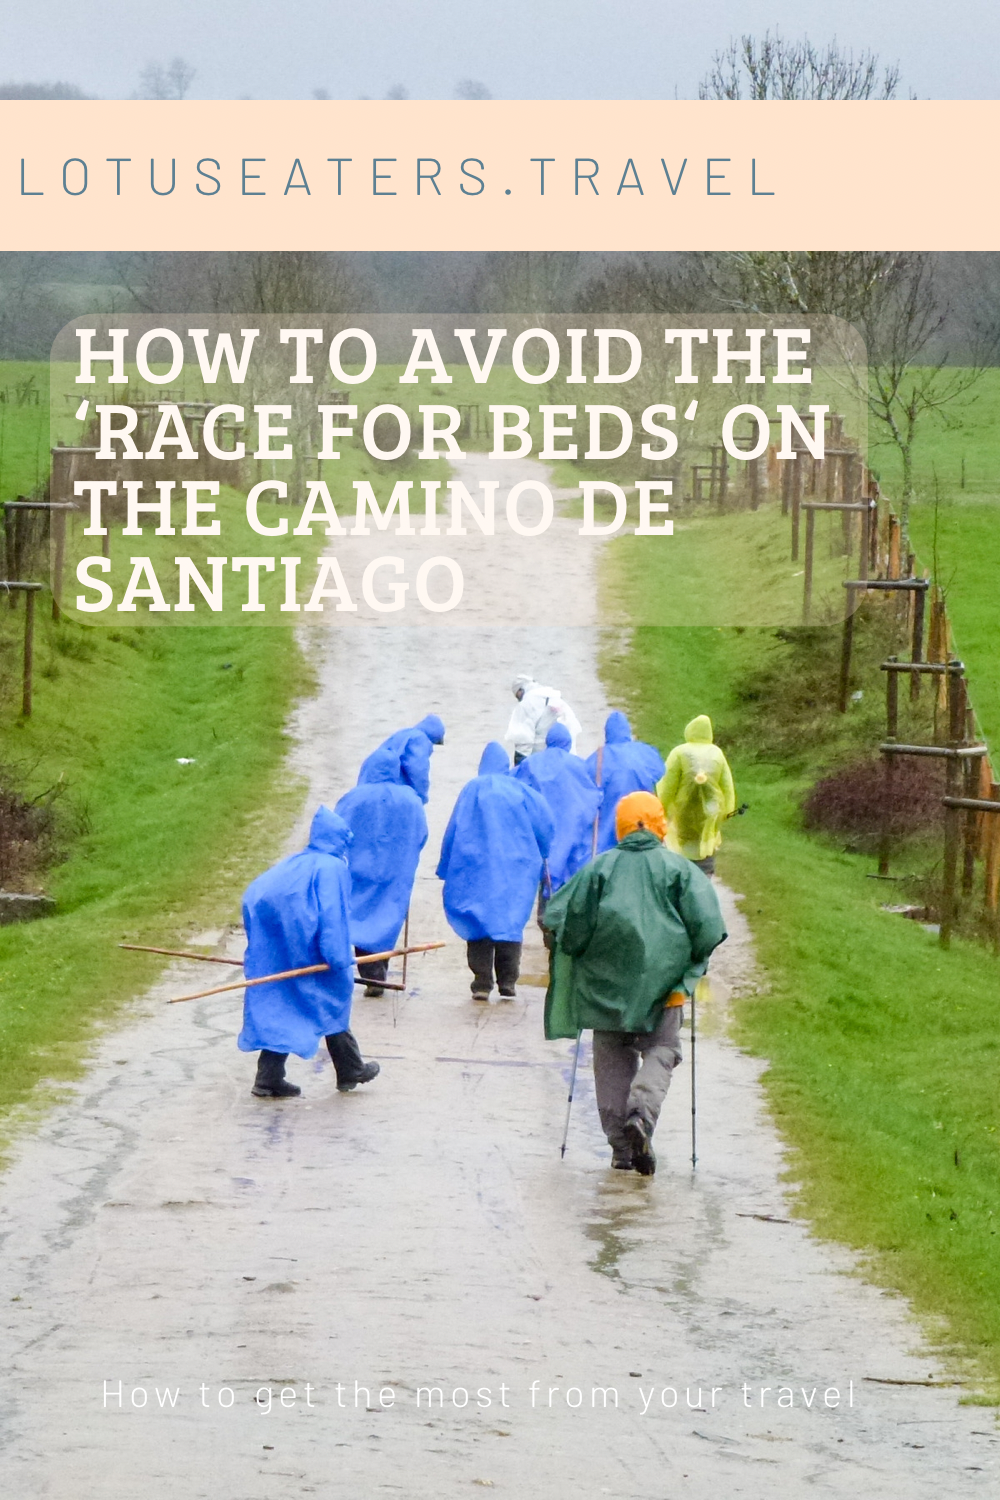 How to avoid the ‘race for beds’ on the Camino de Santiago